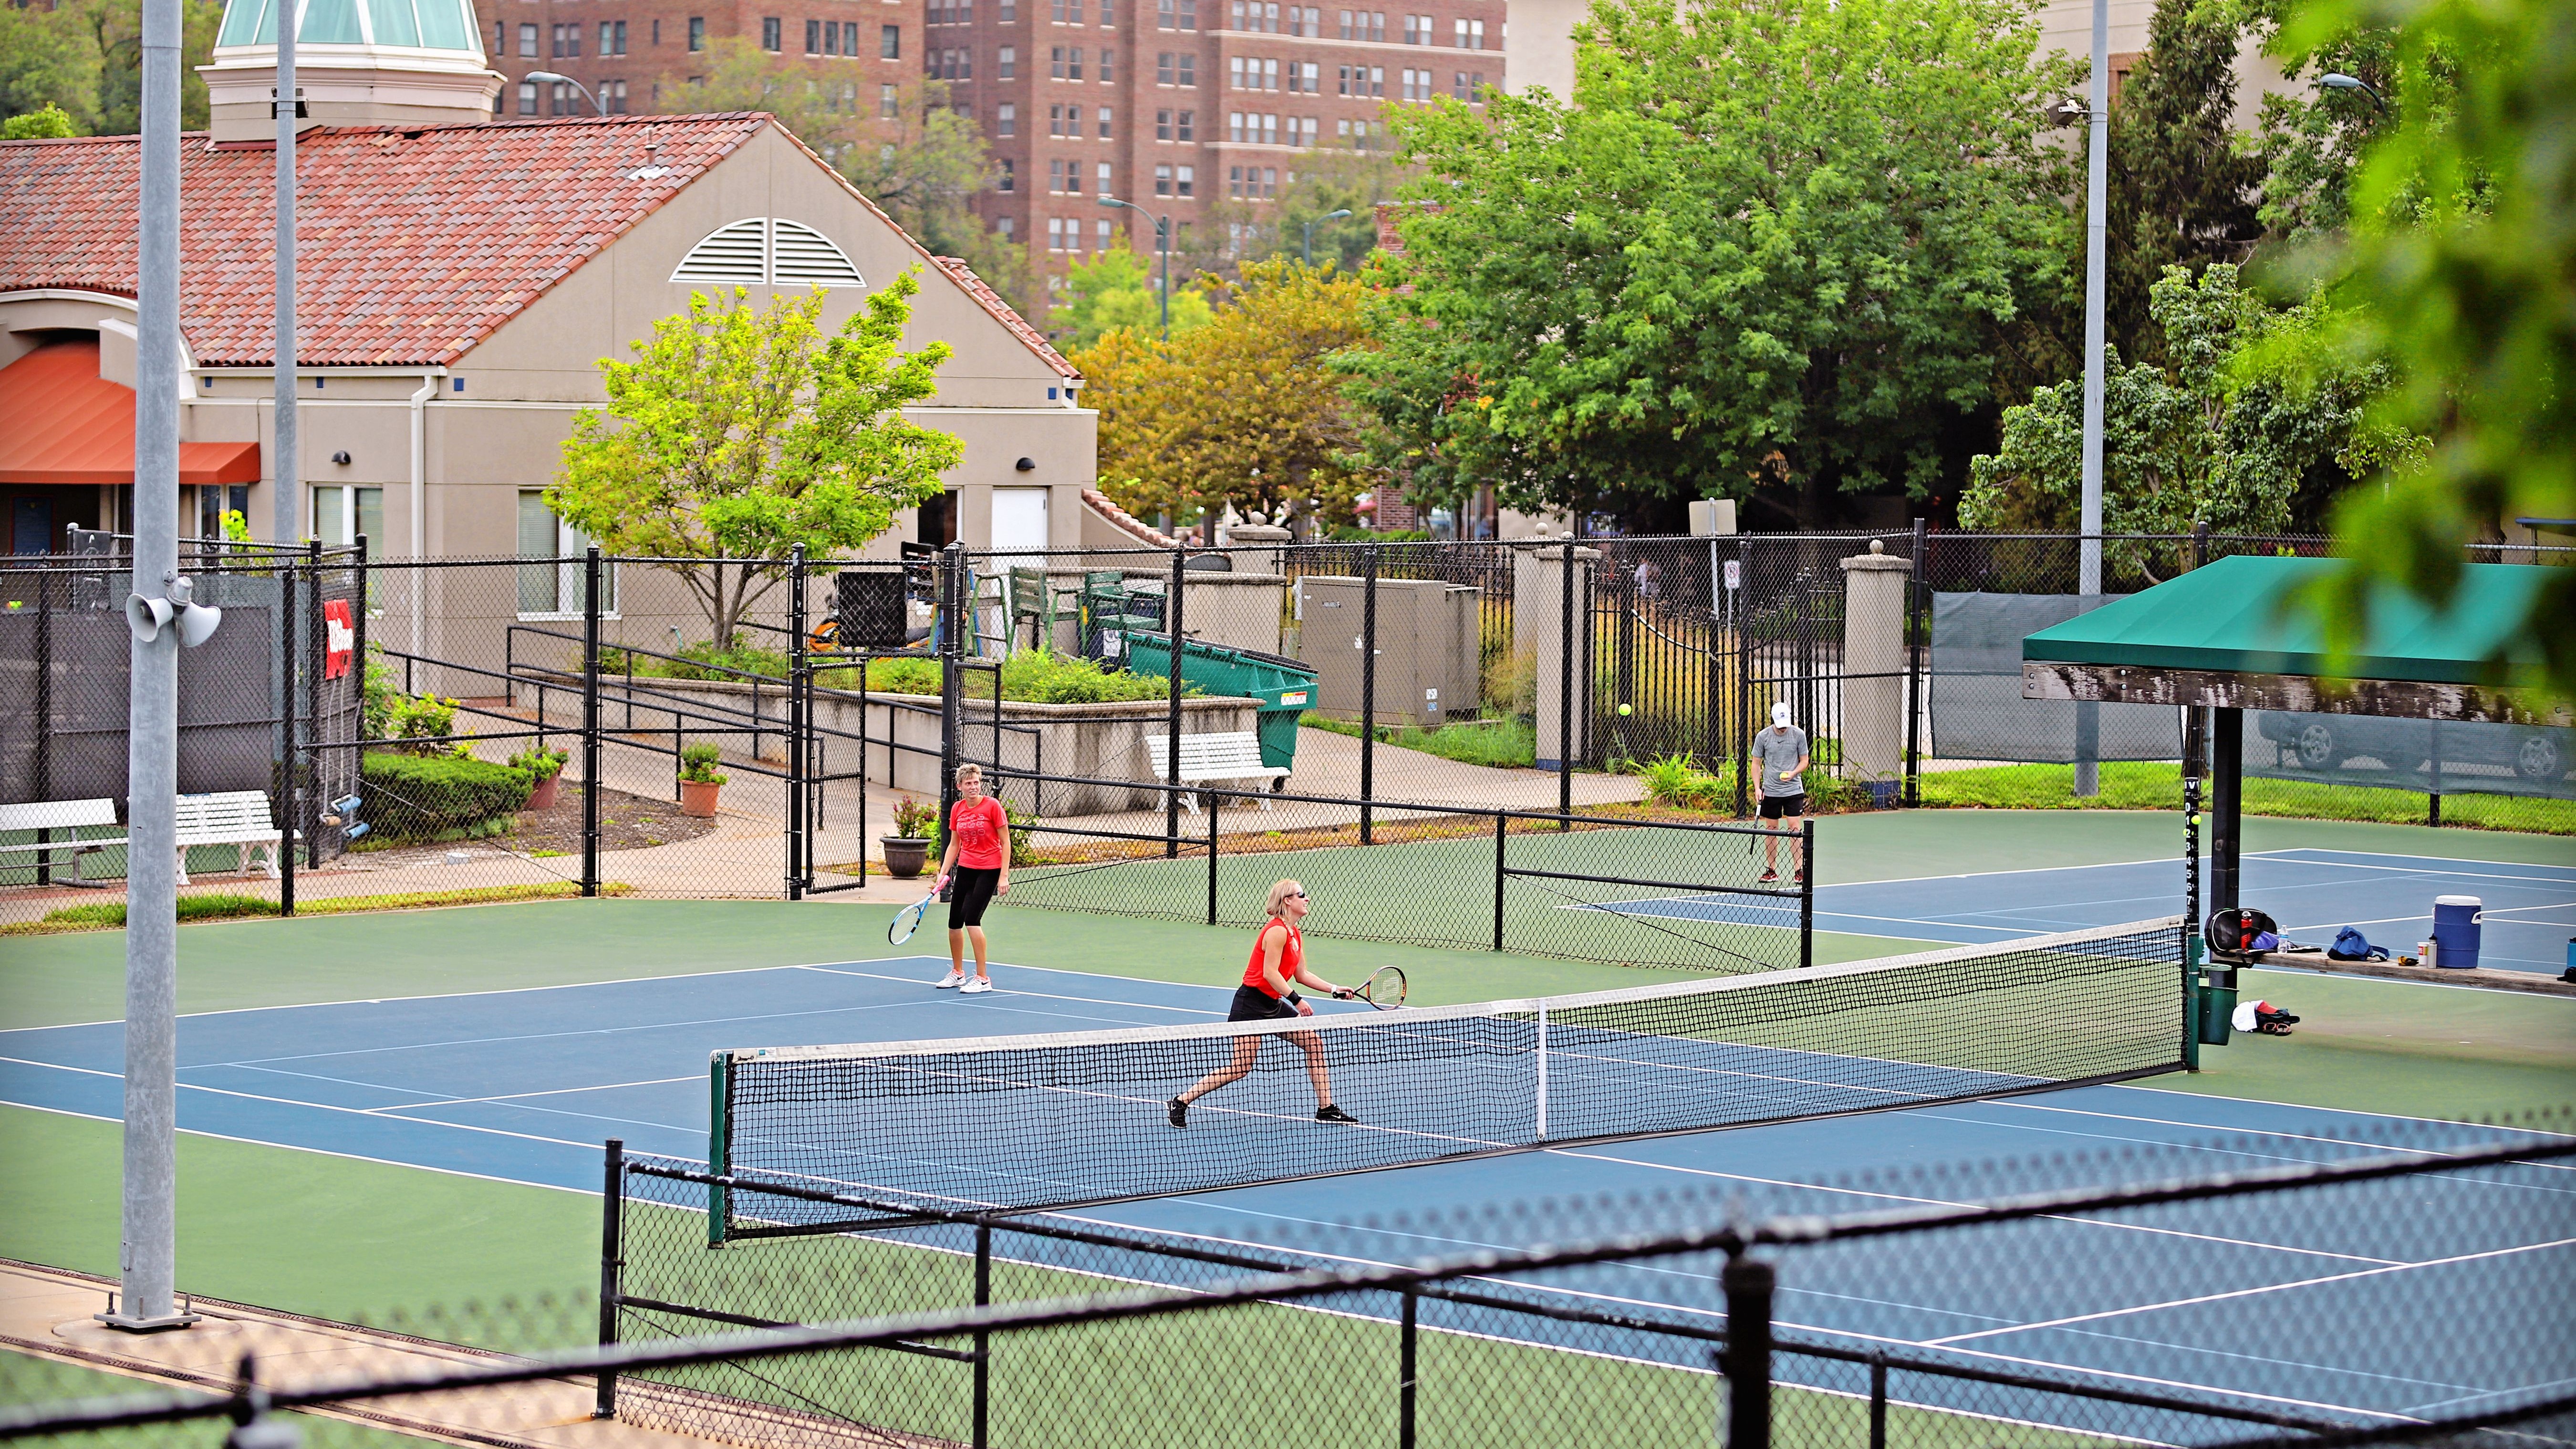 {NEWS} Genesis Health Clubs Now Managing KC Parks Plaza Tennis Center and Offering Covid-Safe Games